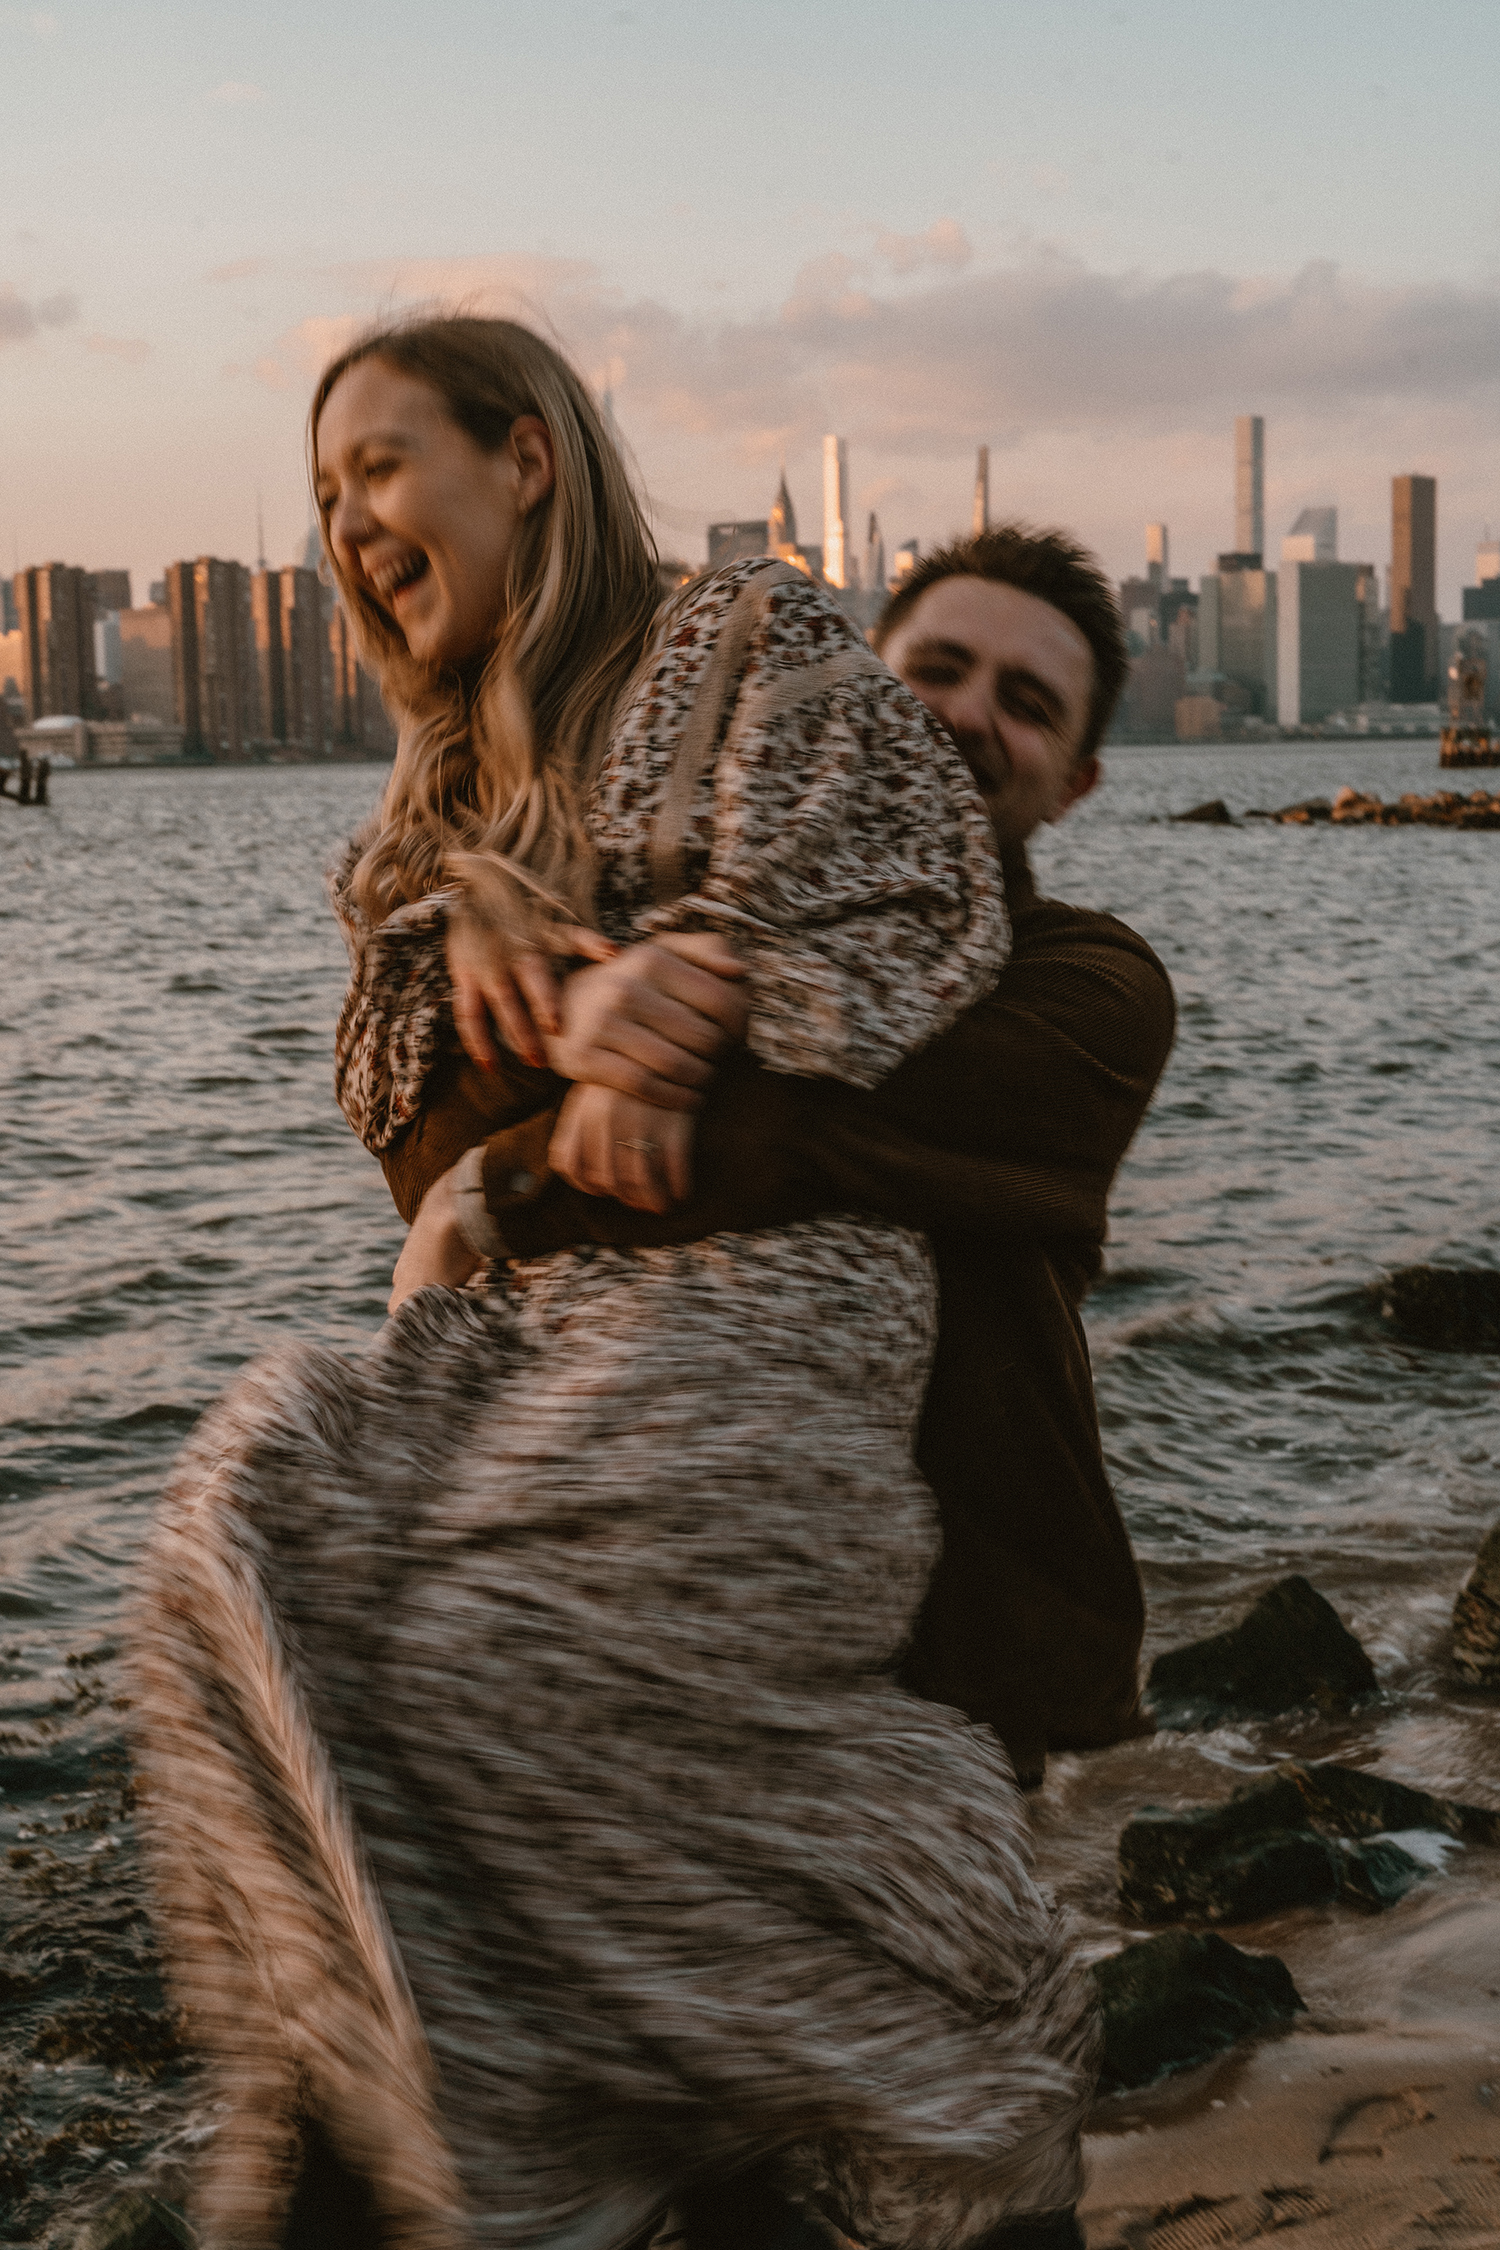 Engagement photos during blue hour looking out over the NYC skyline.